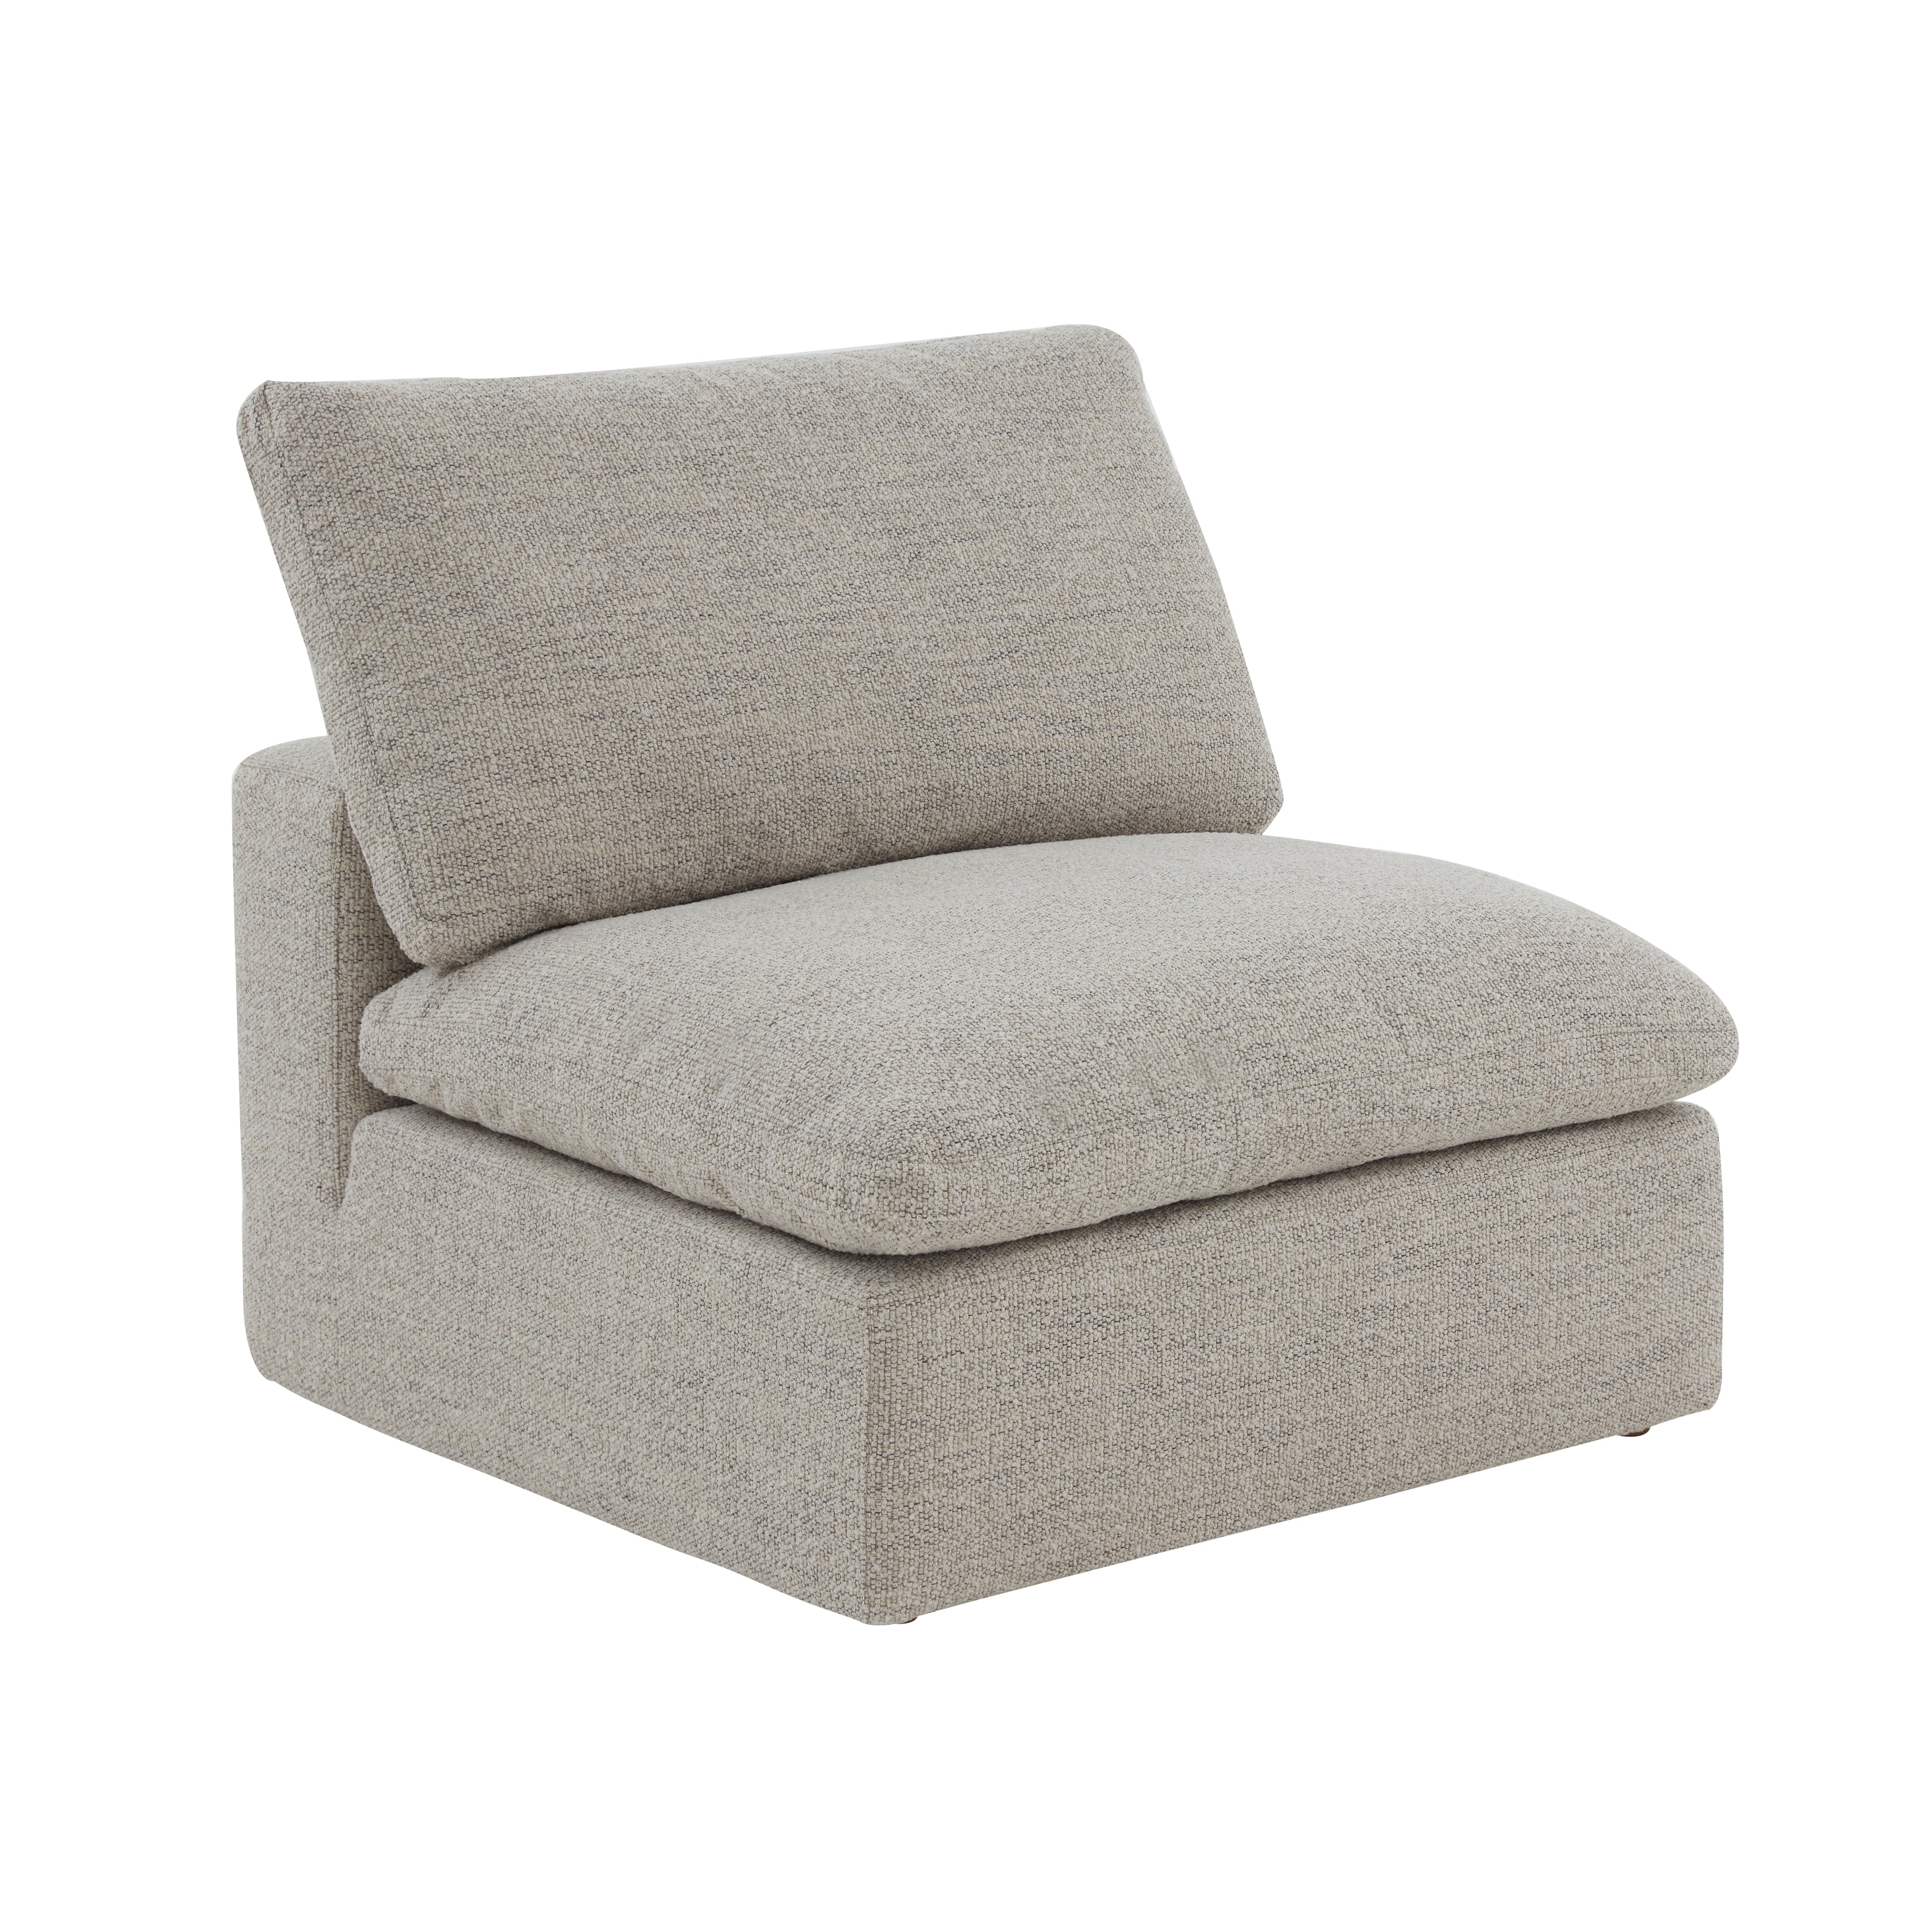 Movie Night™ Armless Chair, Large, Oatmeal - Image 11